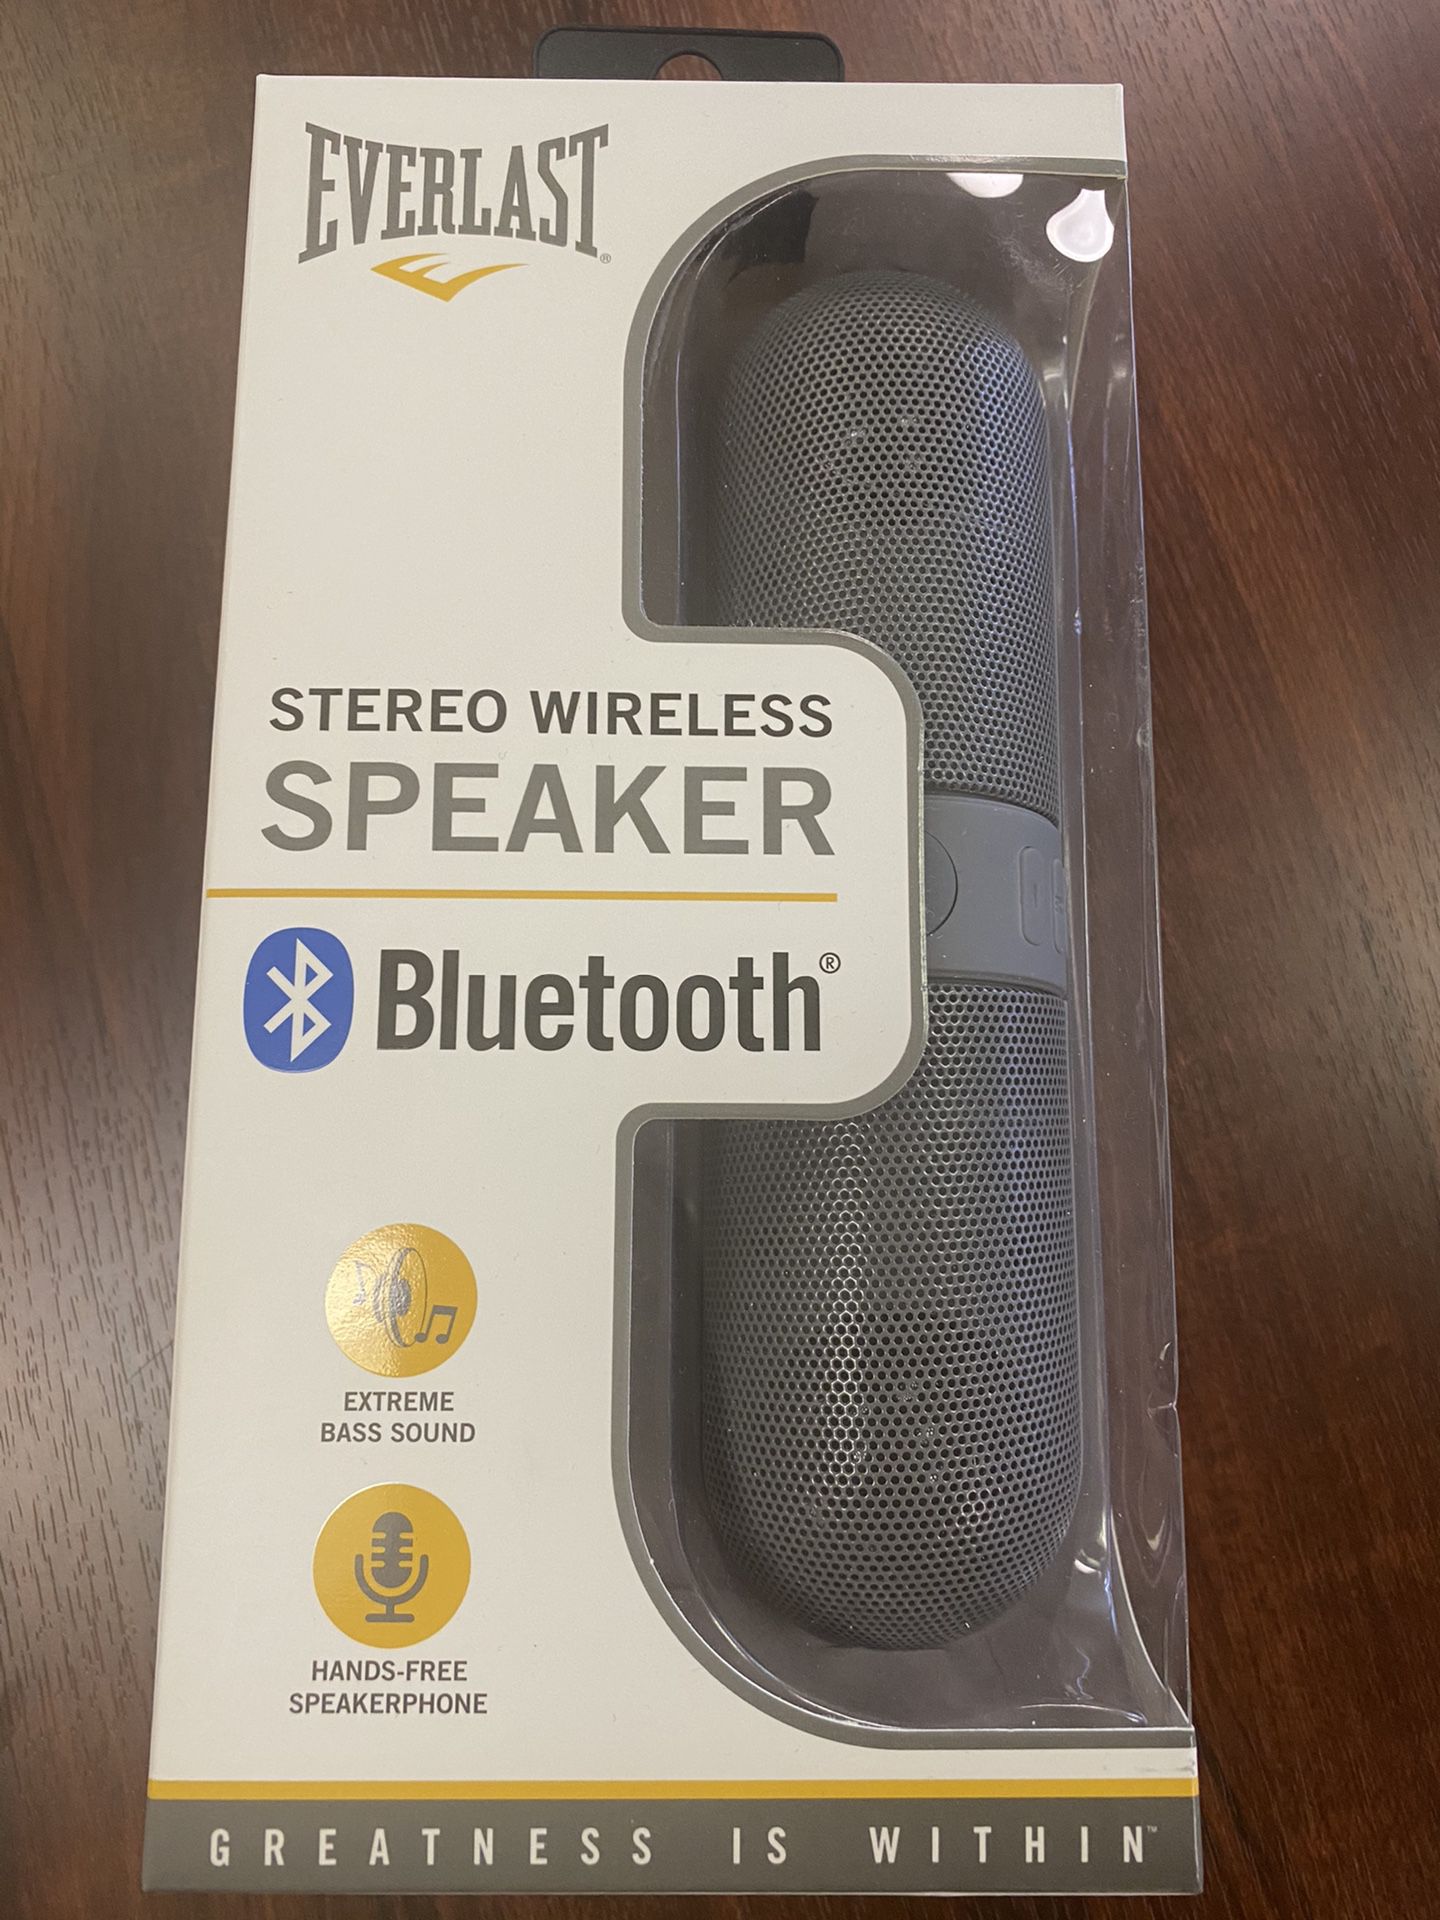 Blue tooth speaker makes calls too